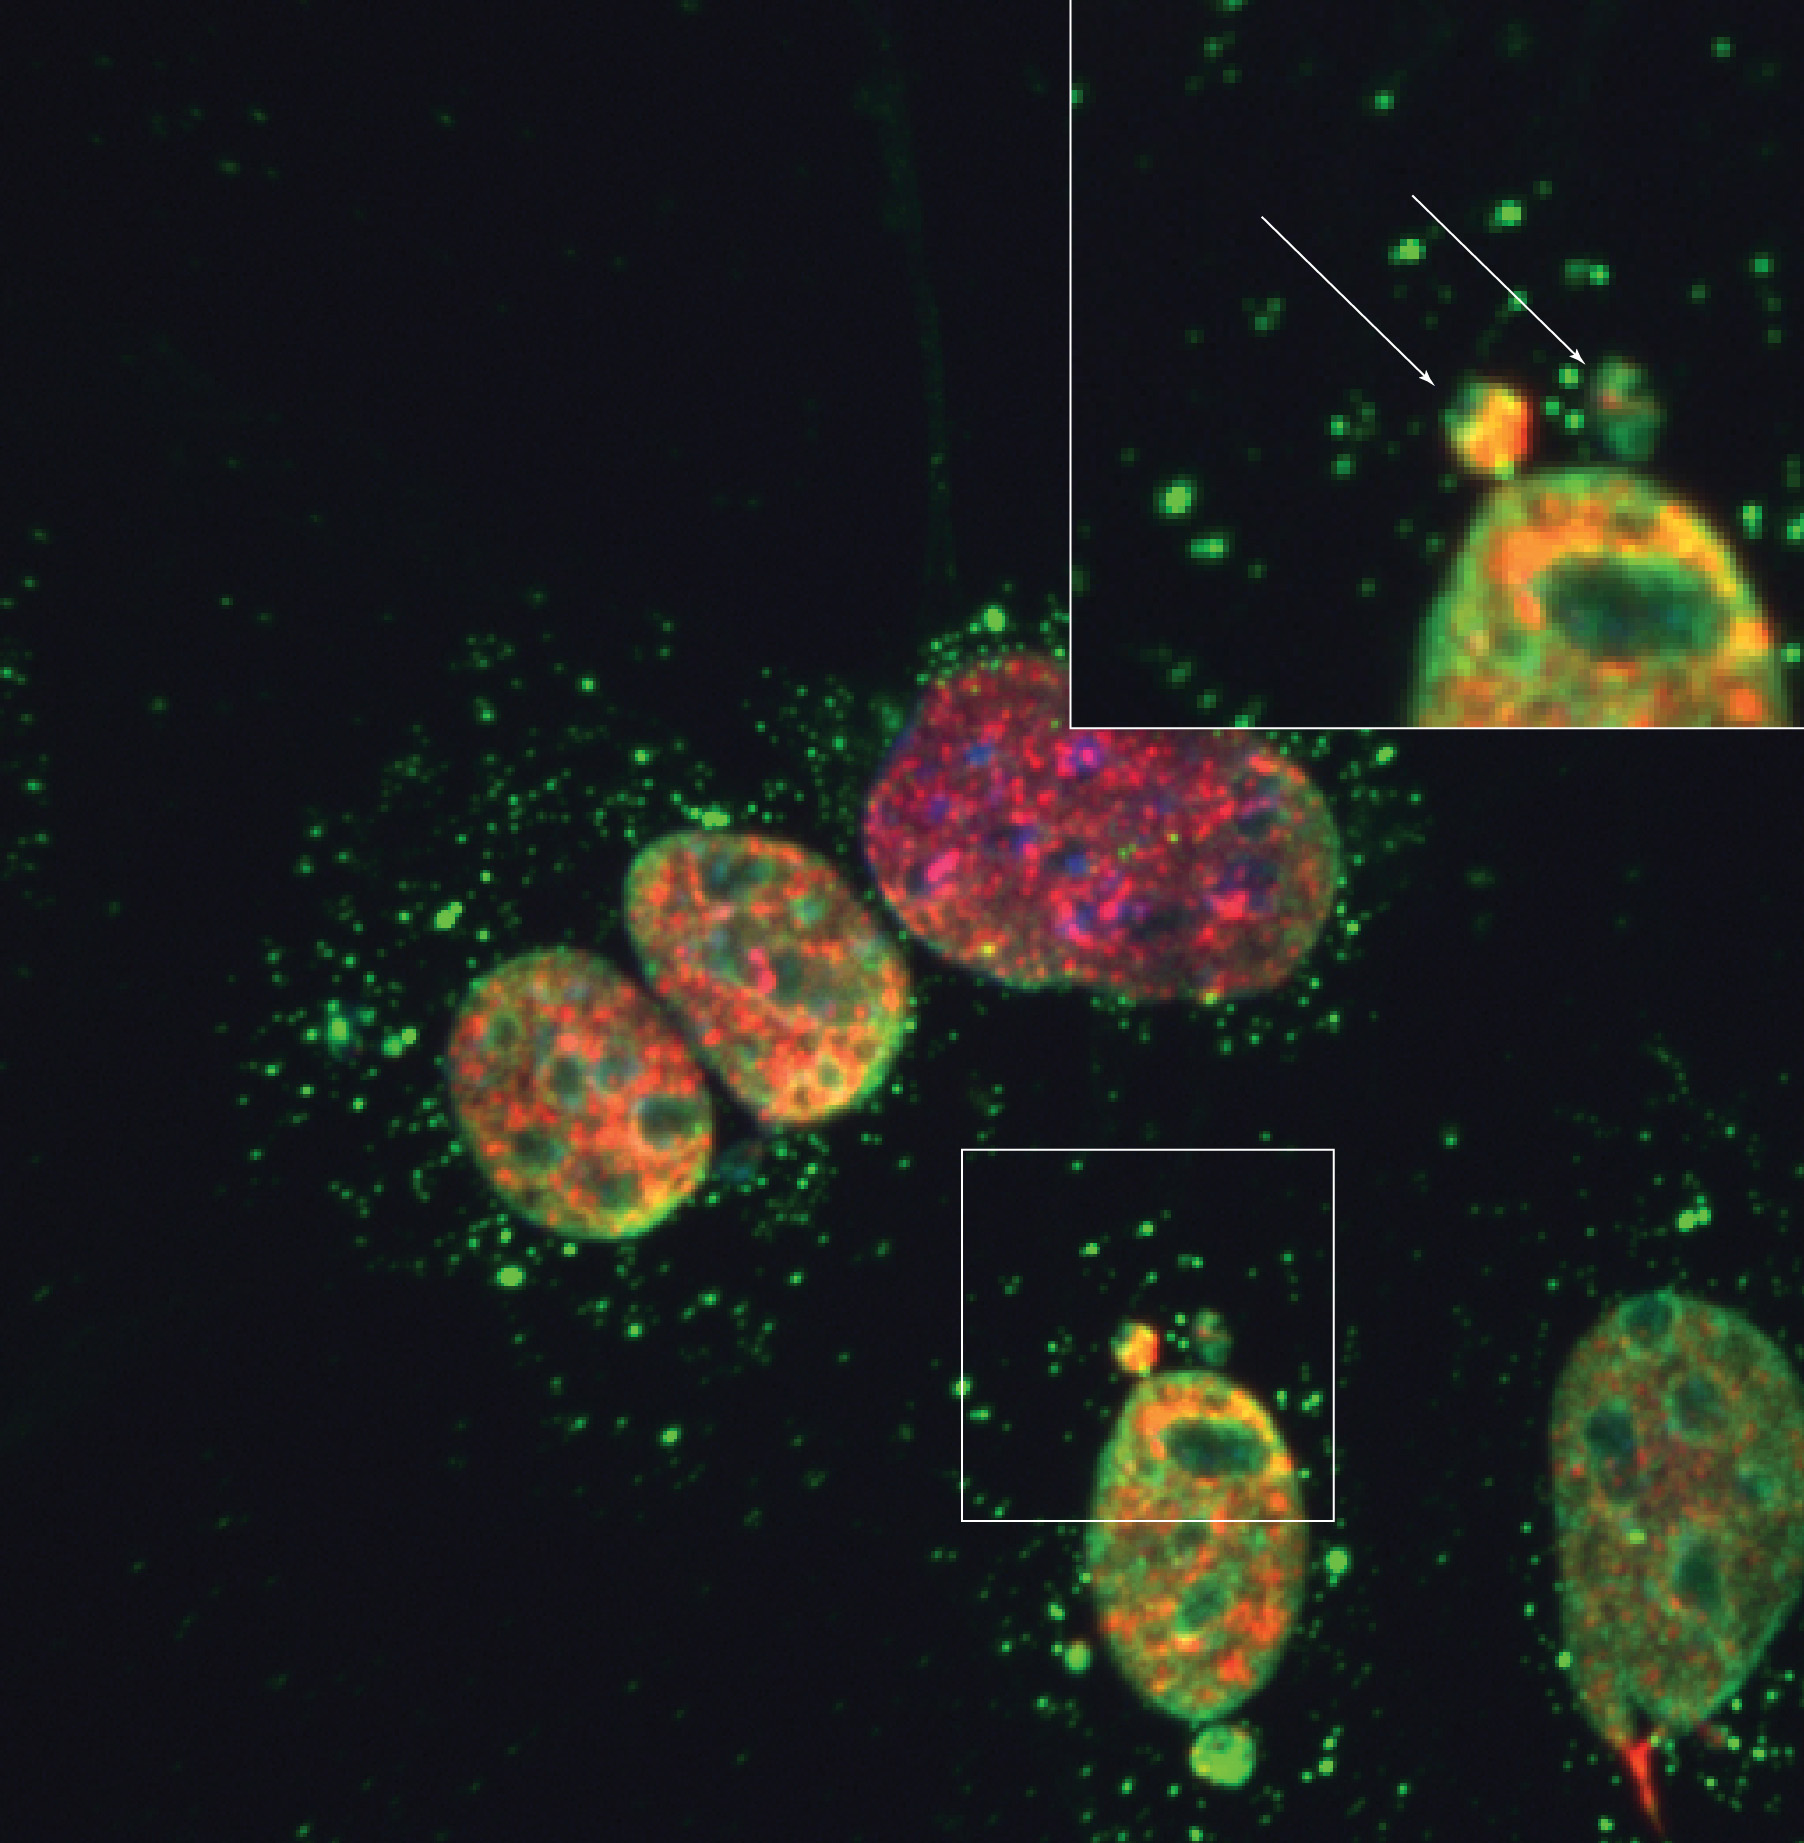 The nuclei of mouse fibroblasts illustrated by Hudson Institute Inflammation Researchers